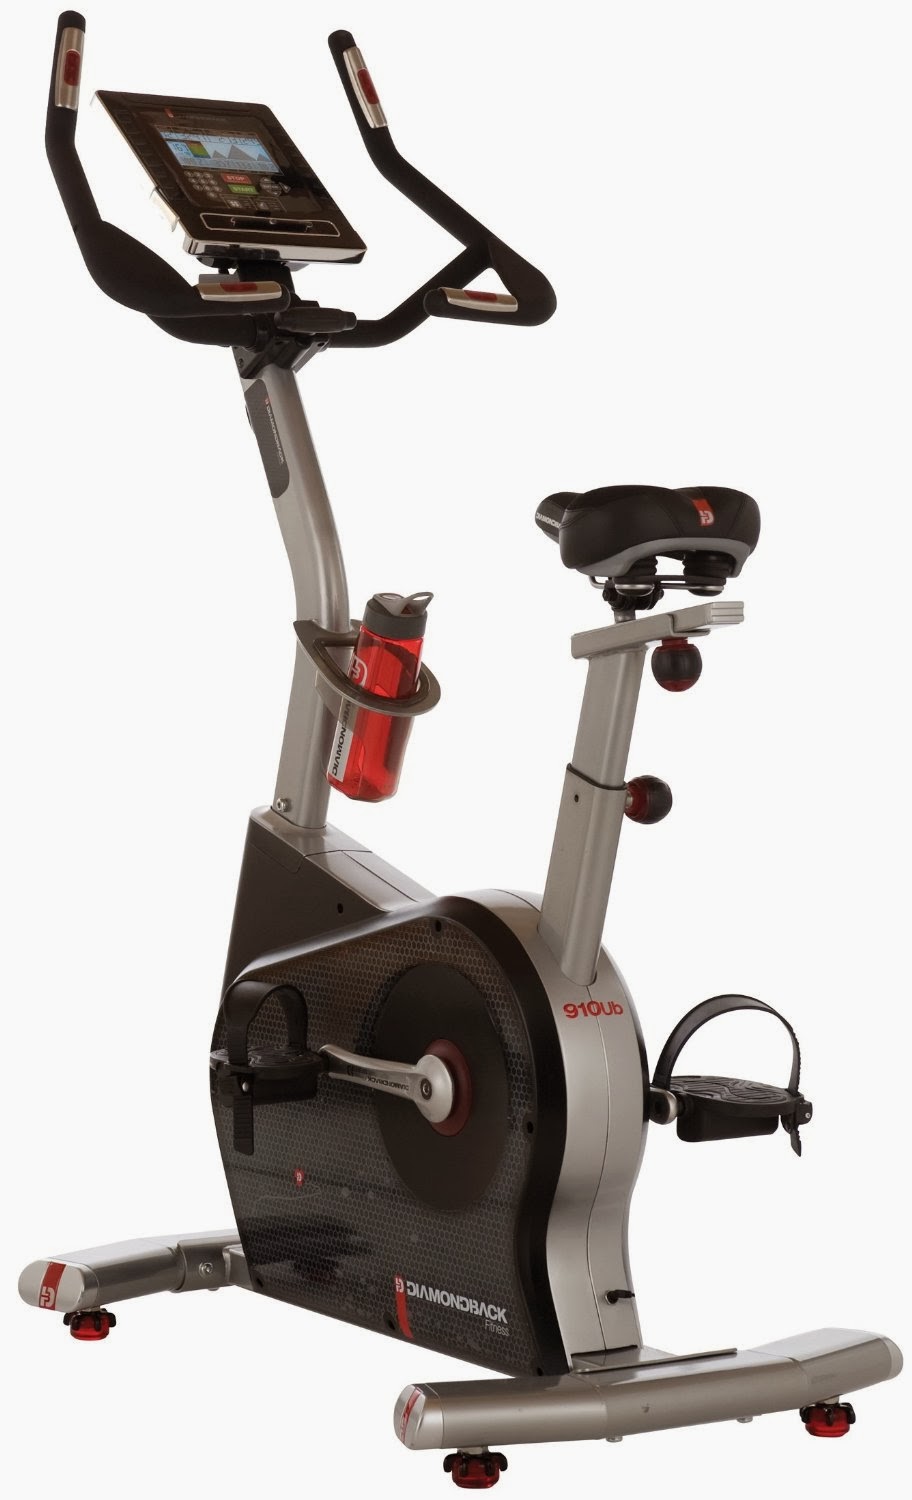 Diamondback Fitness 910Ub Upright Exercise Bike, review features, quality bike, 35 workout programs & 32 resistance levels